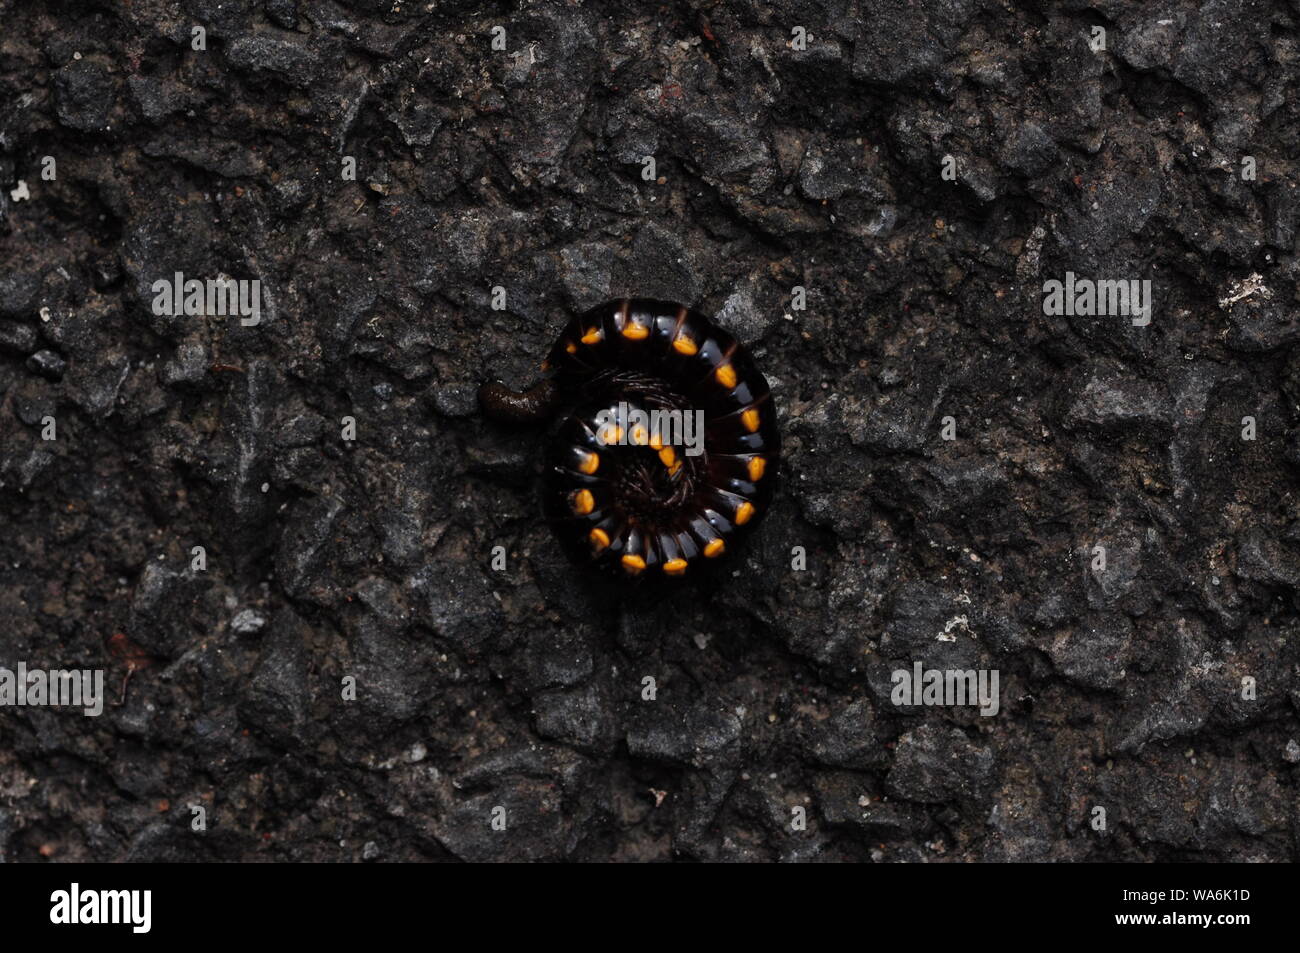 Millipede in coiled position on the ground Stock Photo